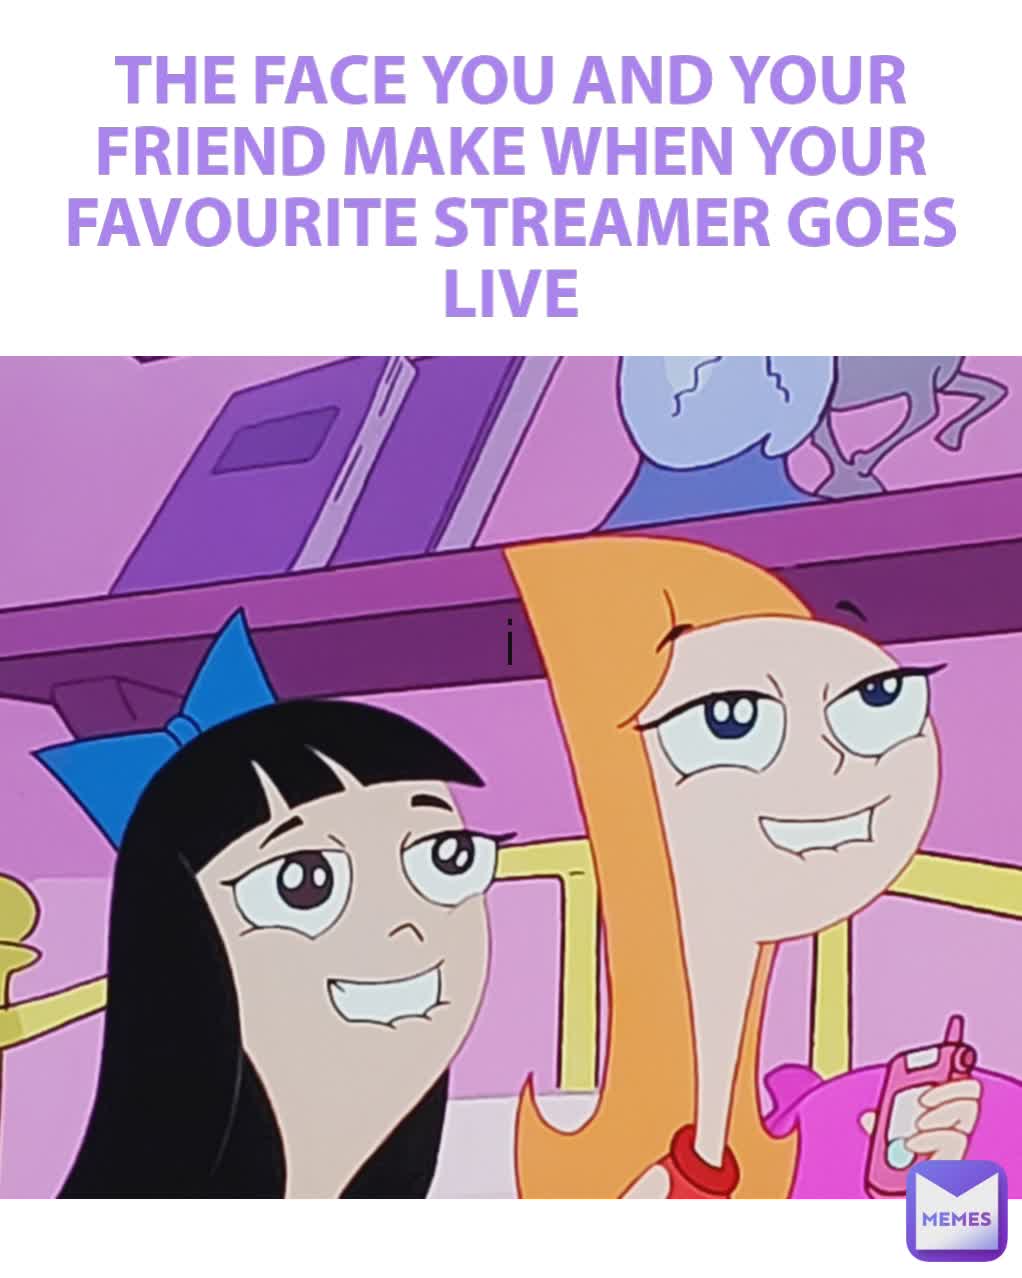 THE FACE YOU AND YOUR FRIEND MAKE WHEN YOUR FAVOURITE STREAMER GOES LIVE
 i